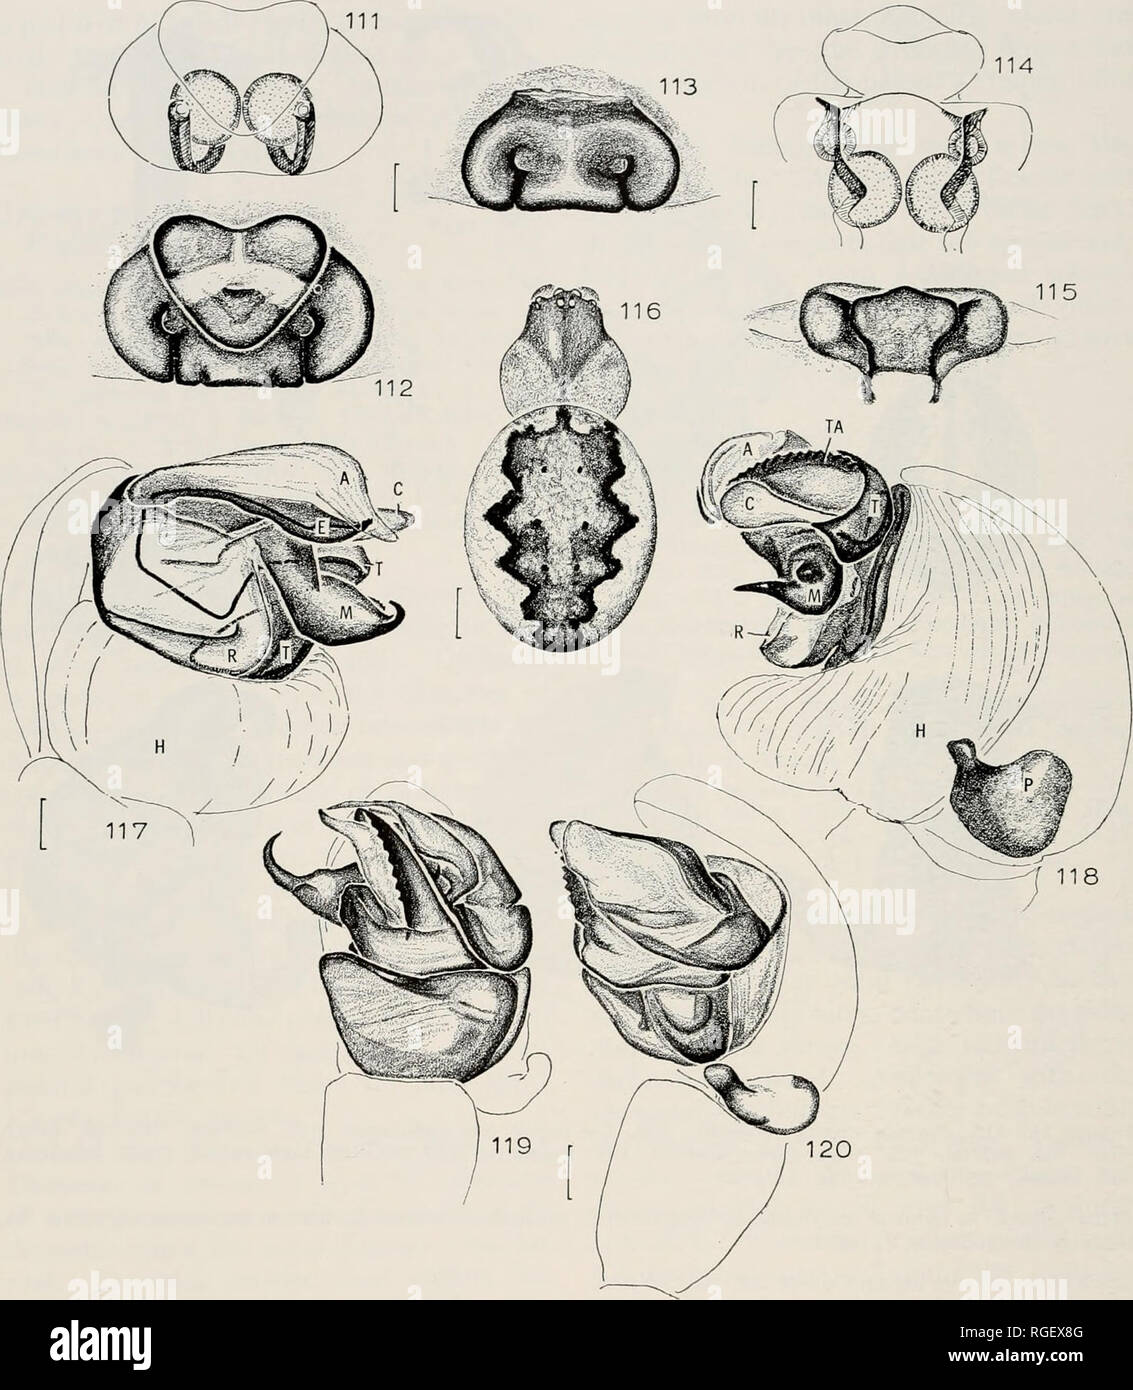 . Bulletin of the Museum of Comparative Zoology at Harvard College. Zoology. 288 Bulletin Museum of Comparative Zoology, Vol. 146, No. 5. Figures 111-120. Zygiella sia (Strand). 111-115. Epigynum. 111. Ventral, cleared. 112. Ventral. 113. Ven- tral, scape torn off. 114. Posterior, cleared. 115. Posterior. 116. Female. 117-120. Left male palpus. 117, 118. Expanded. 119. Ventral. 120. Lateral. Abbreviations. A, terminal apophysis; C, conductor; E, embolus; H, hematodocha; M, median apophysis; P, para- cymbium; R, radix; T, tegulum; TA, projection of tegulum. Scale lines. 0.1 mm except Figure 116 Stock Photo